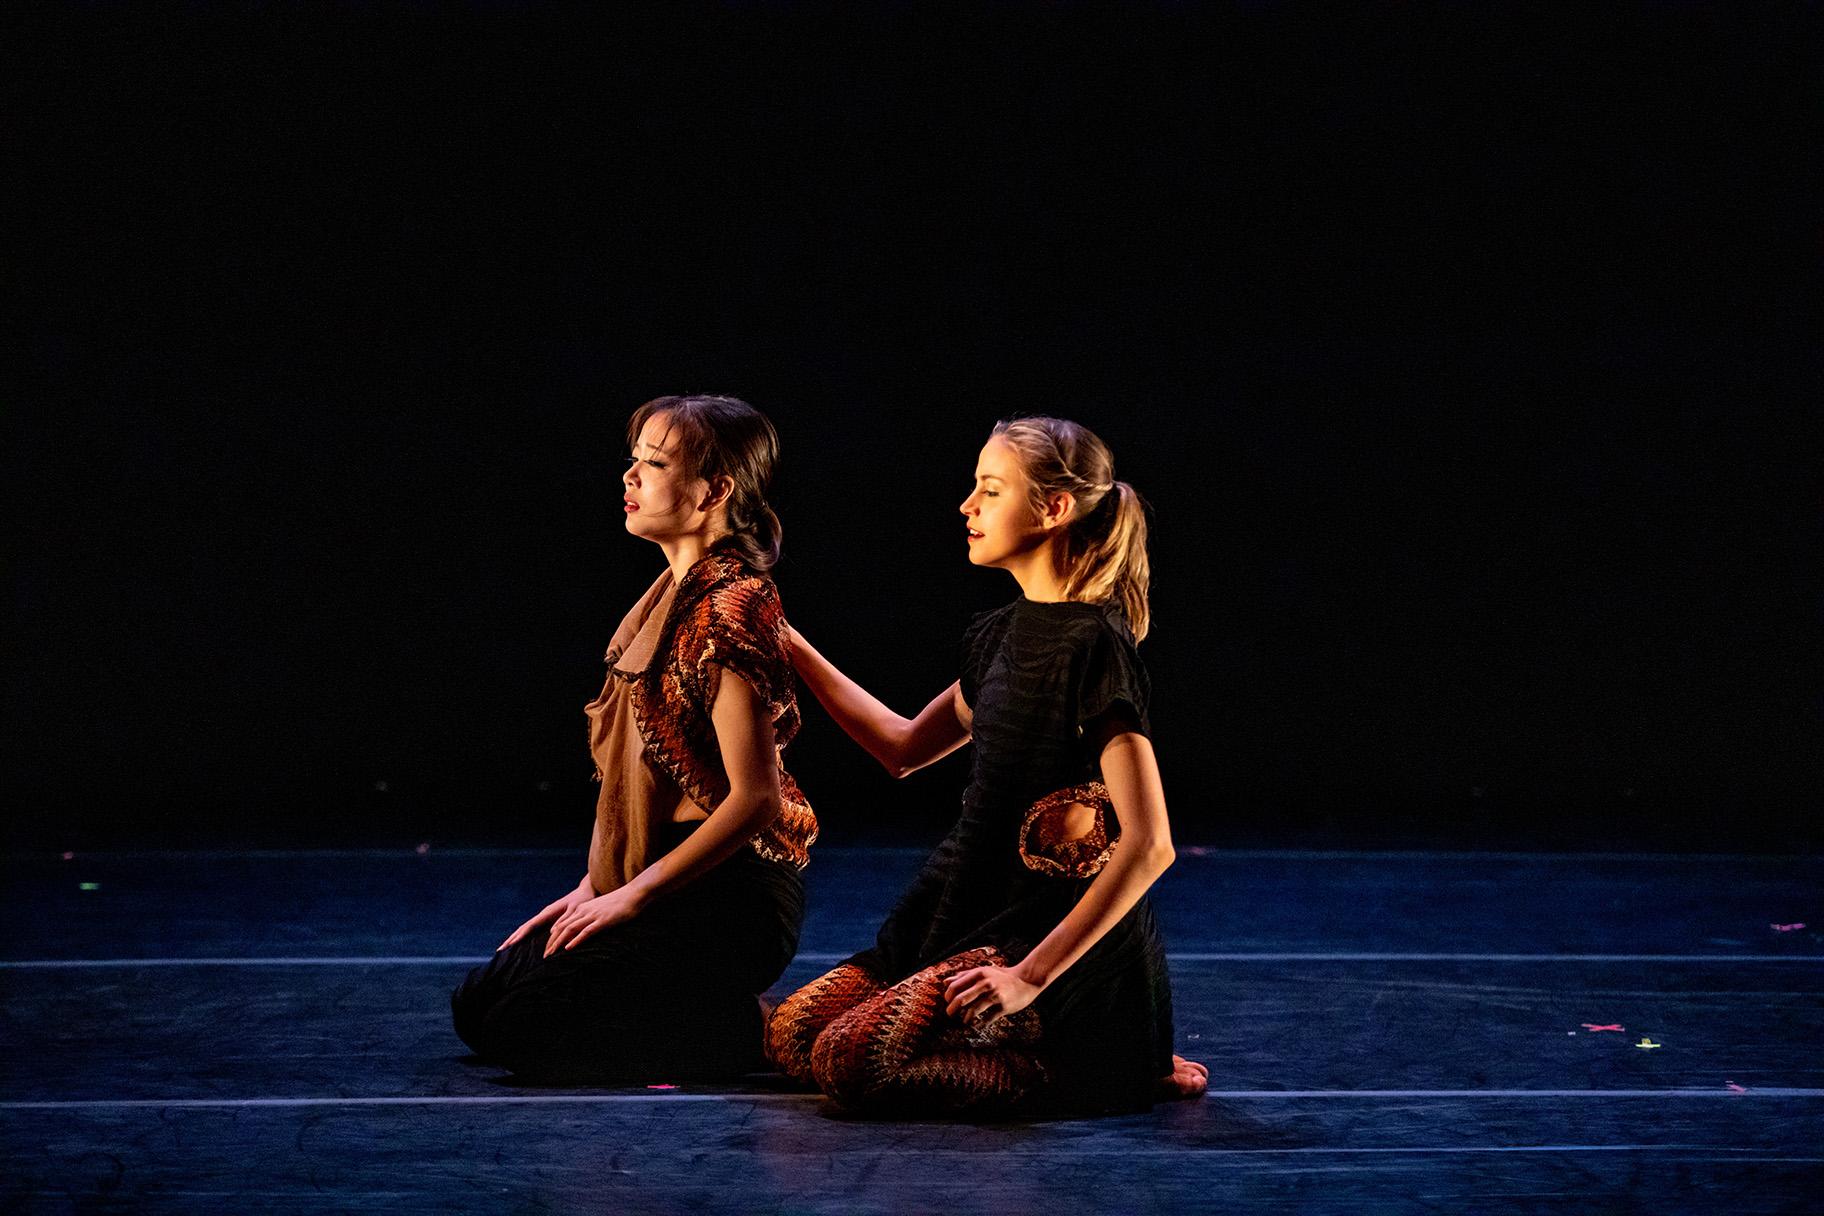 Marin Soki and Abbey Yoder in “Give the People What They Want” by Marissa Osato (Photo by Cheryl Mann)